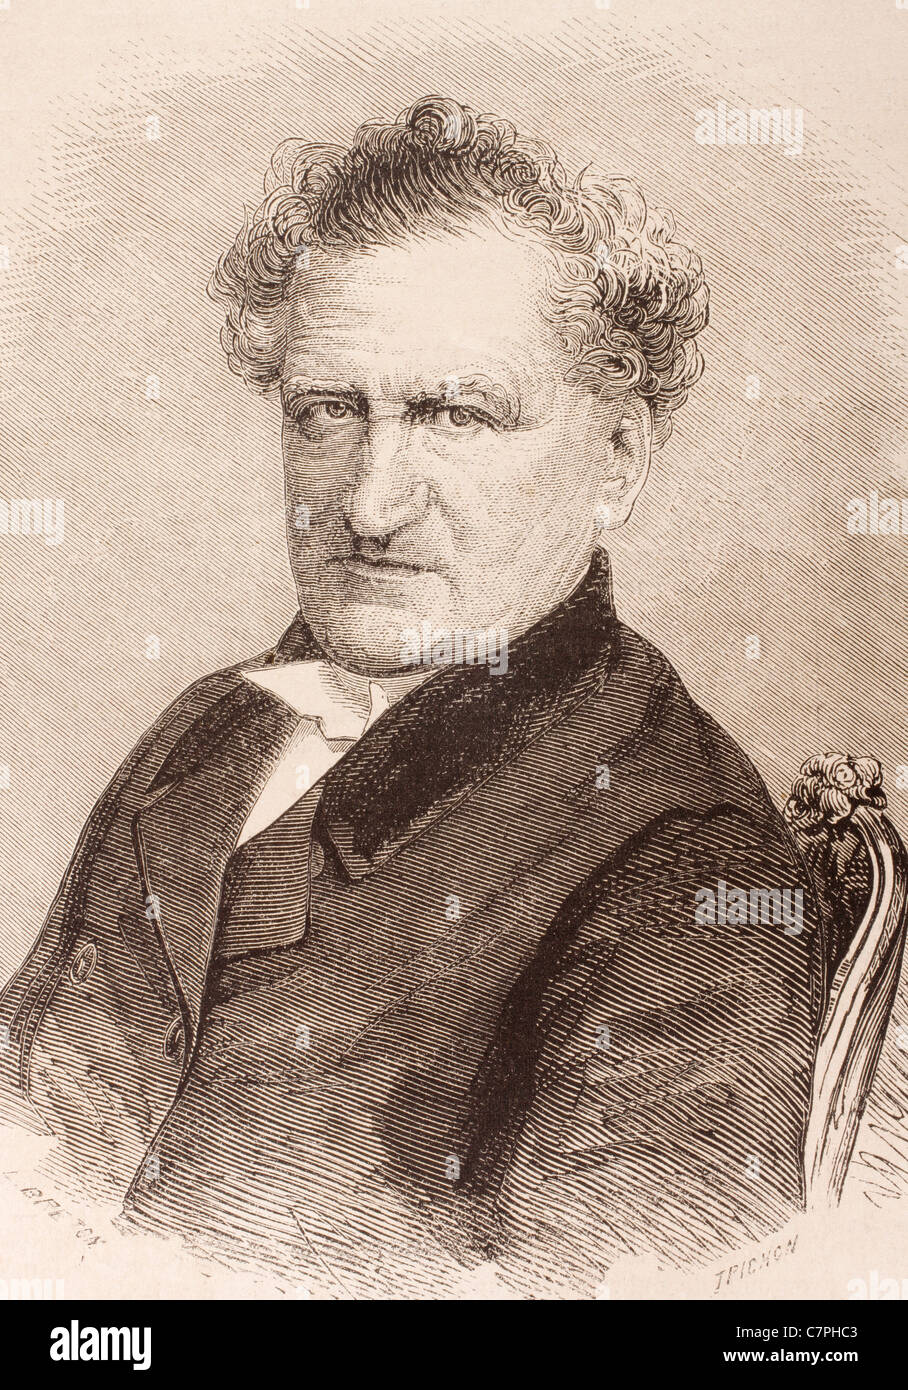 François Jean Baptiste Provost, 1798-1865. Member of the Comédie Française and professor at the French Conservatoire. Stock Photo